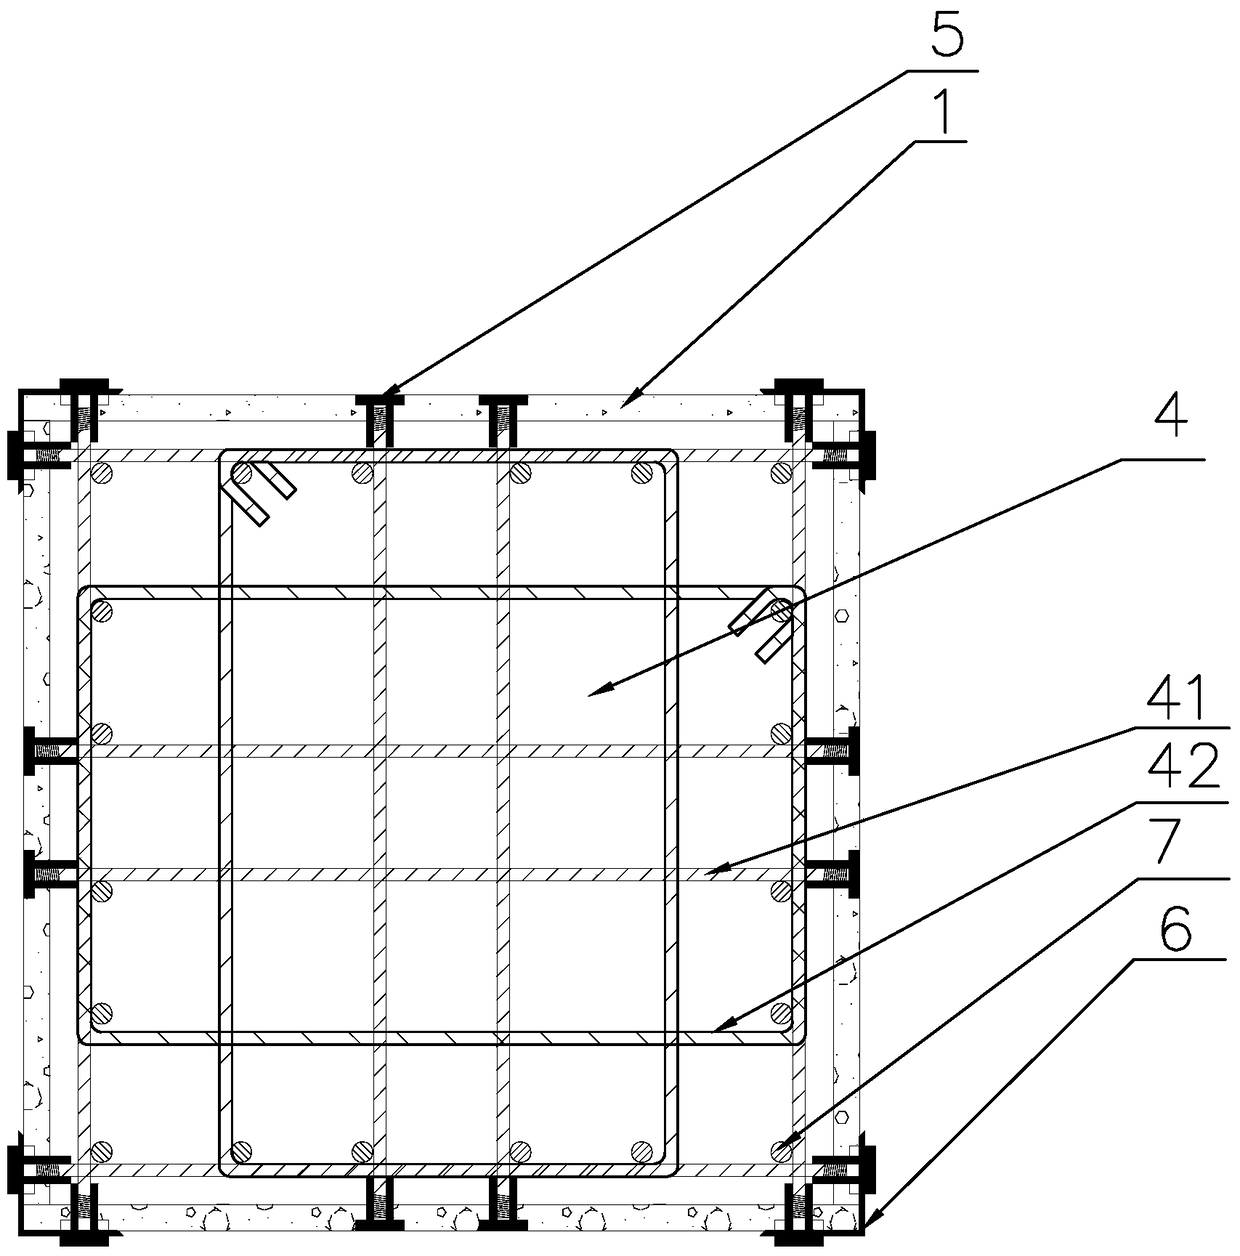 A self-balancing integral formwork assembly structure of reinforced concrete columns